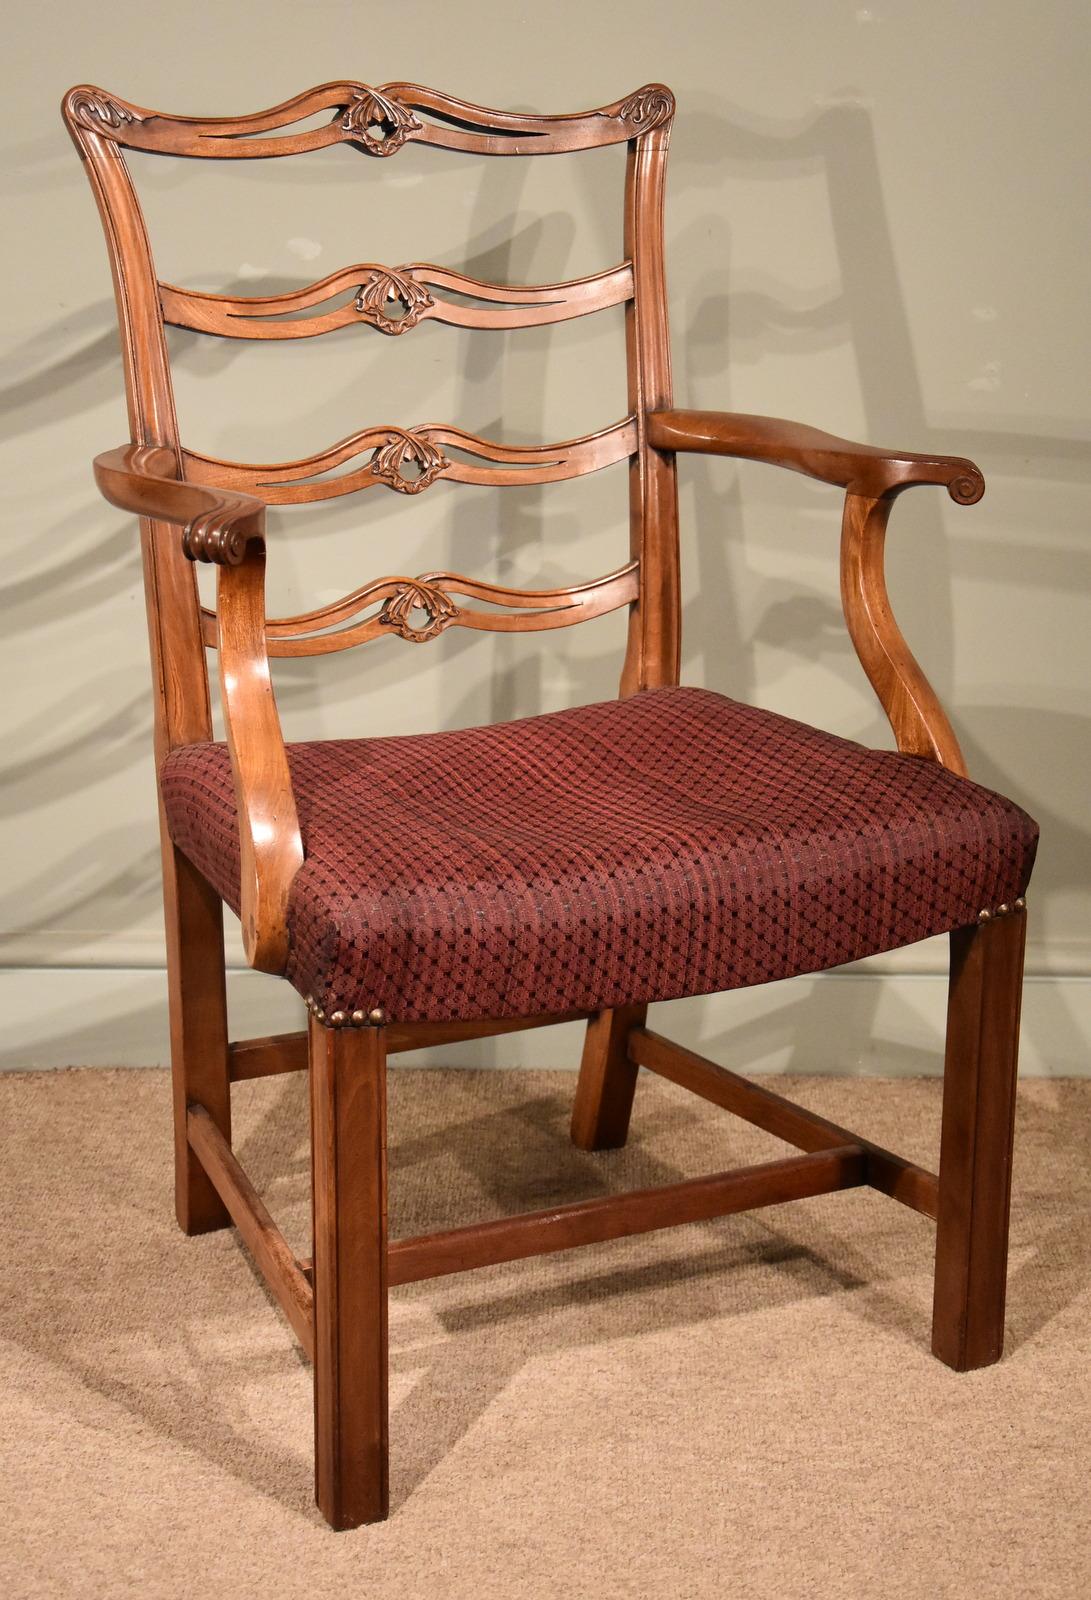 The set of eight (6 + 2) carved mahogany dining chairs with saddle seats have recently been recovered in fine horse hair upholstery. The ladderback chairs have horizontal cross rails and are decorated with pierced interlacing centres and carved ears